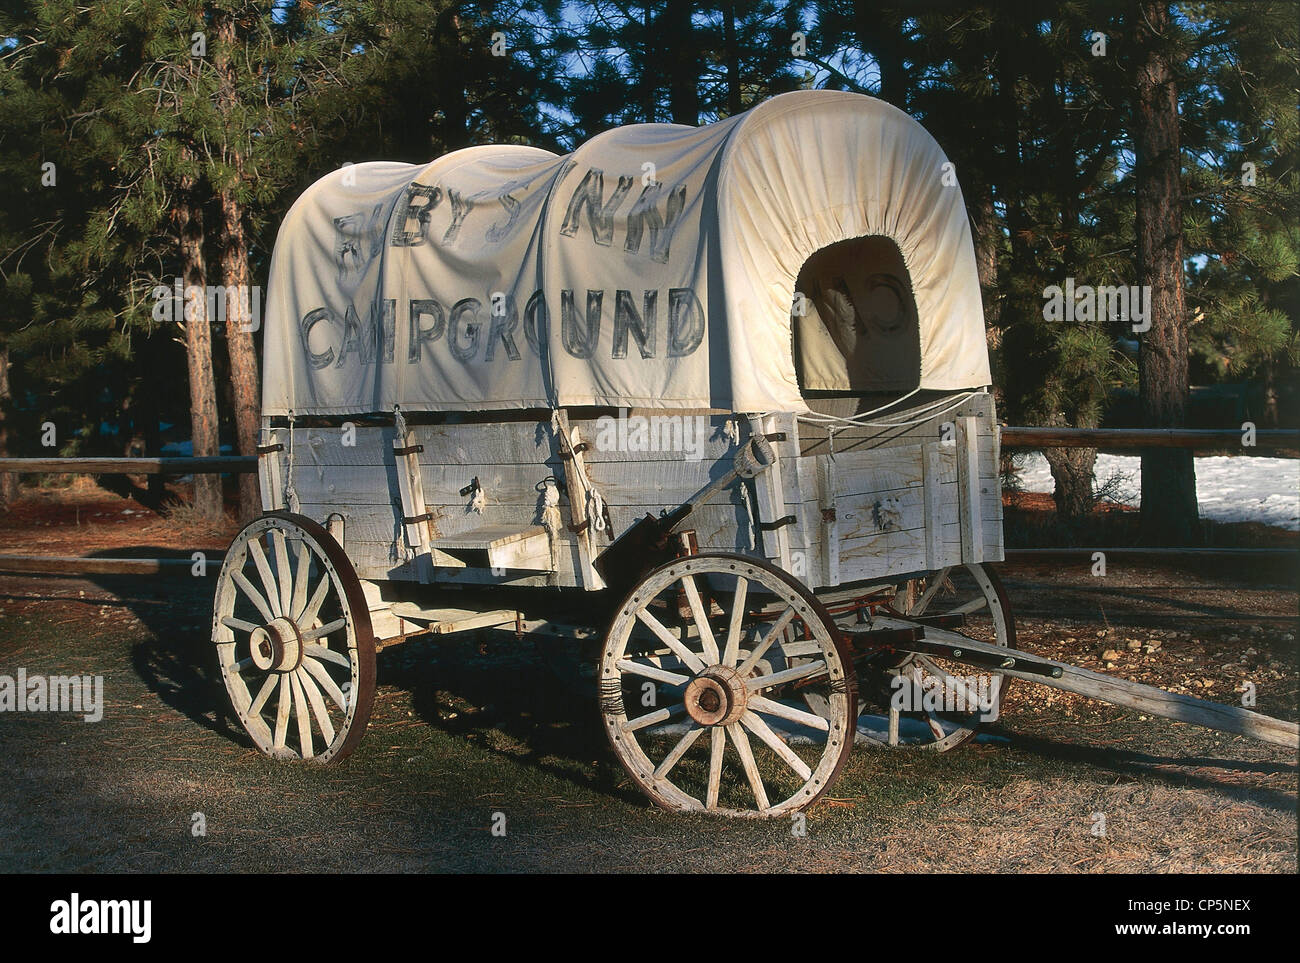 United States of America - Utah - Ruby's Inn Village. A wagon of Ruby's Inn Campground at the entrance of Bryce Canyon. Stock Photo